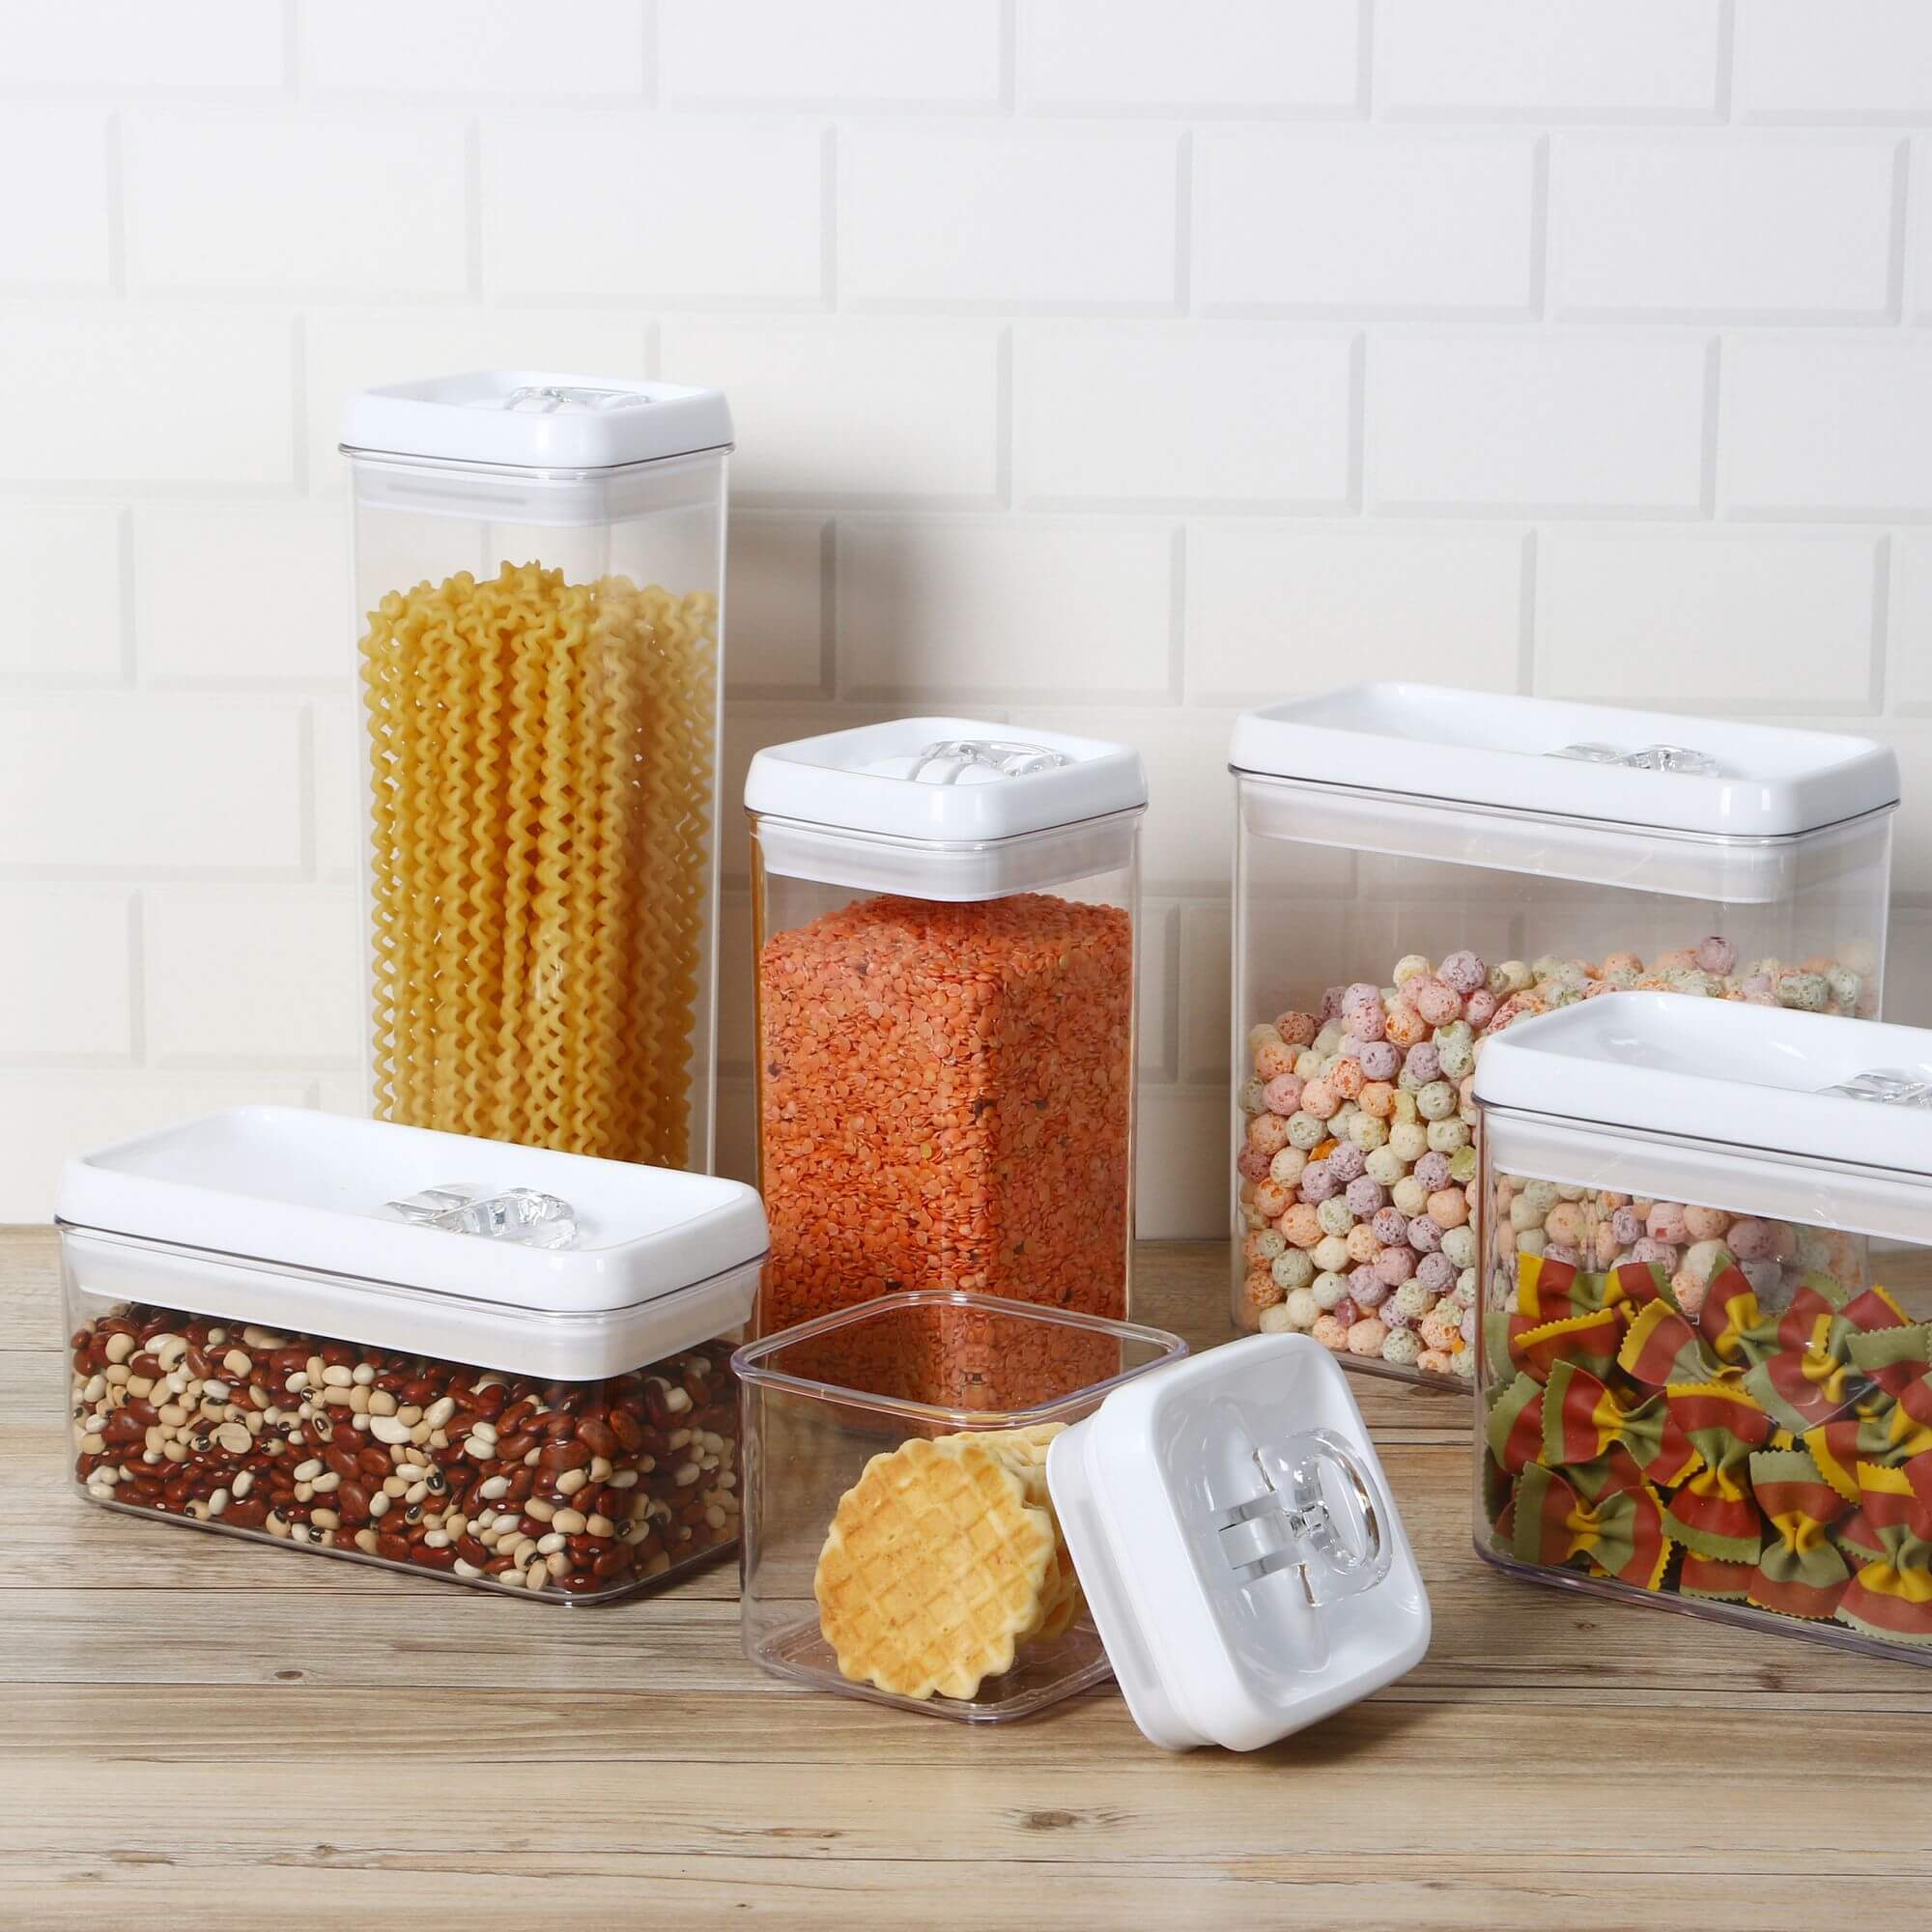 Felli Flip Tite kitchen containers with pasta and other kitchen staples inside